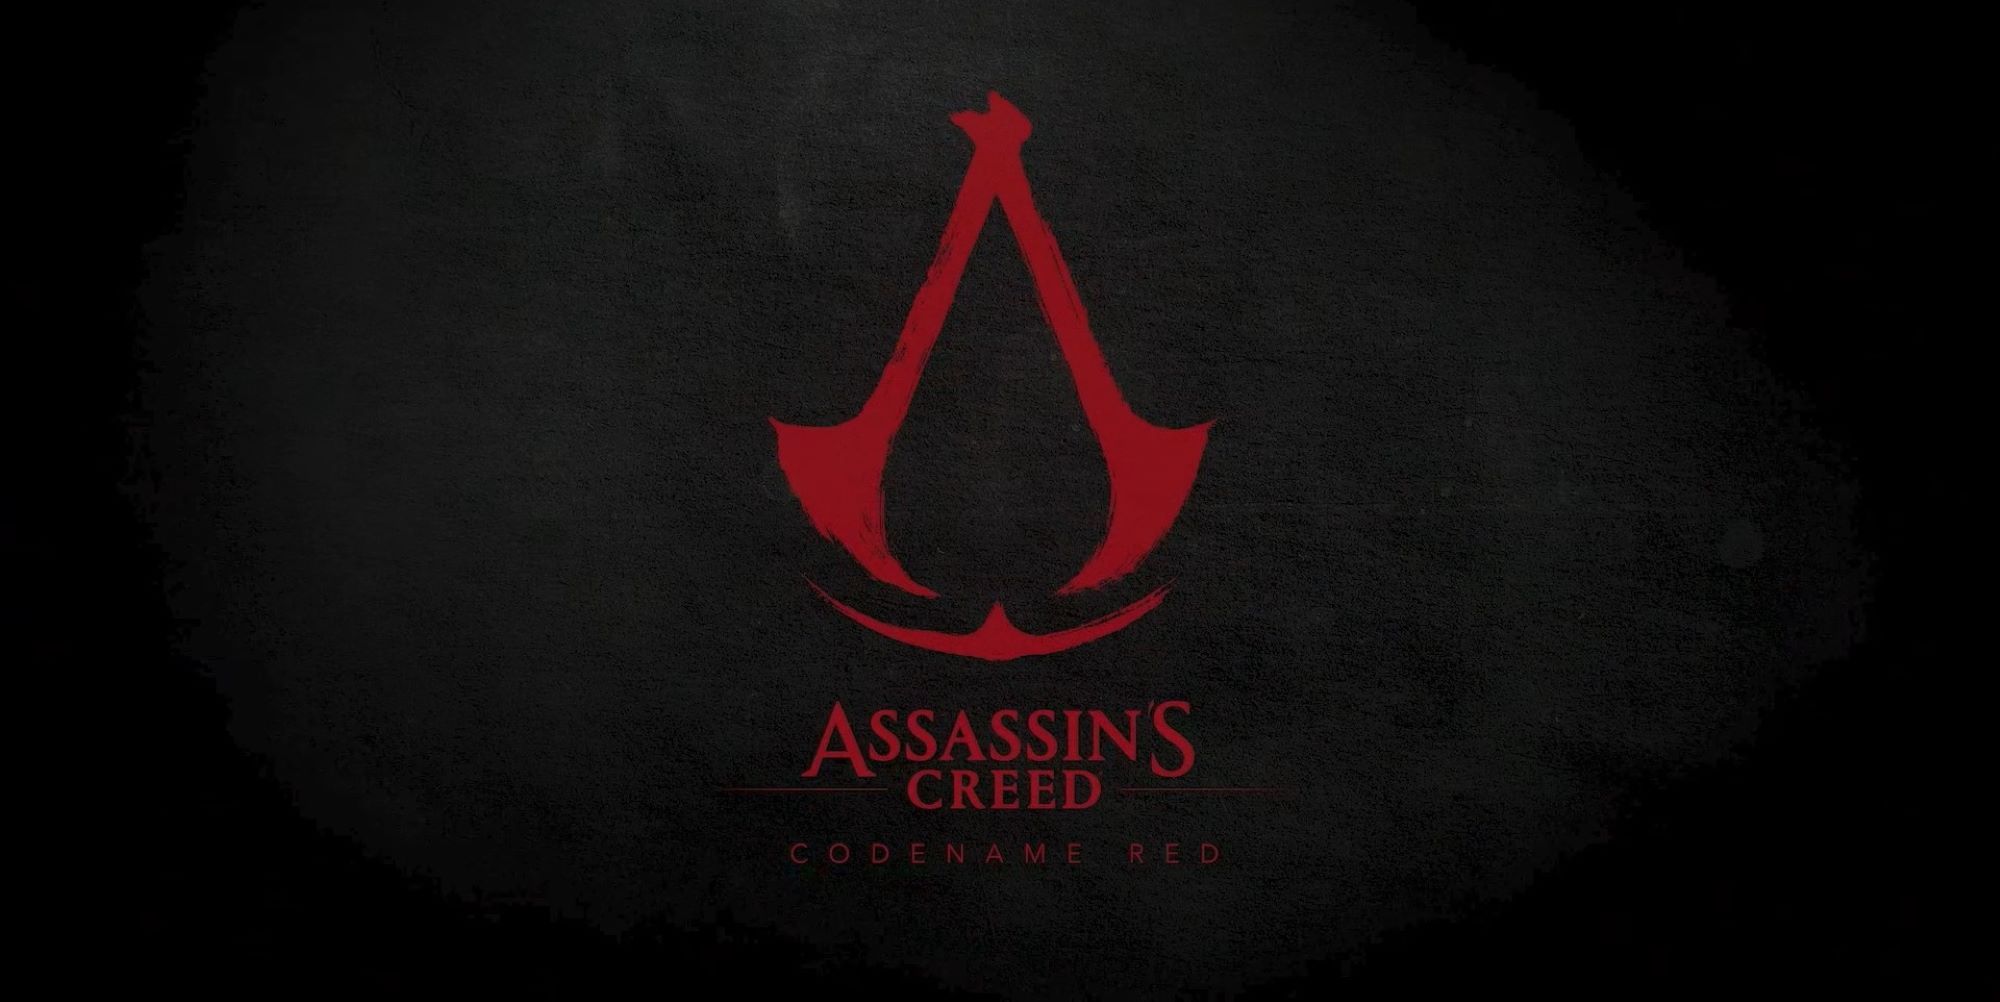 Ubisoft Assassin's Creed Codename Red Logo